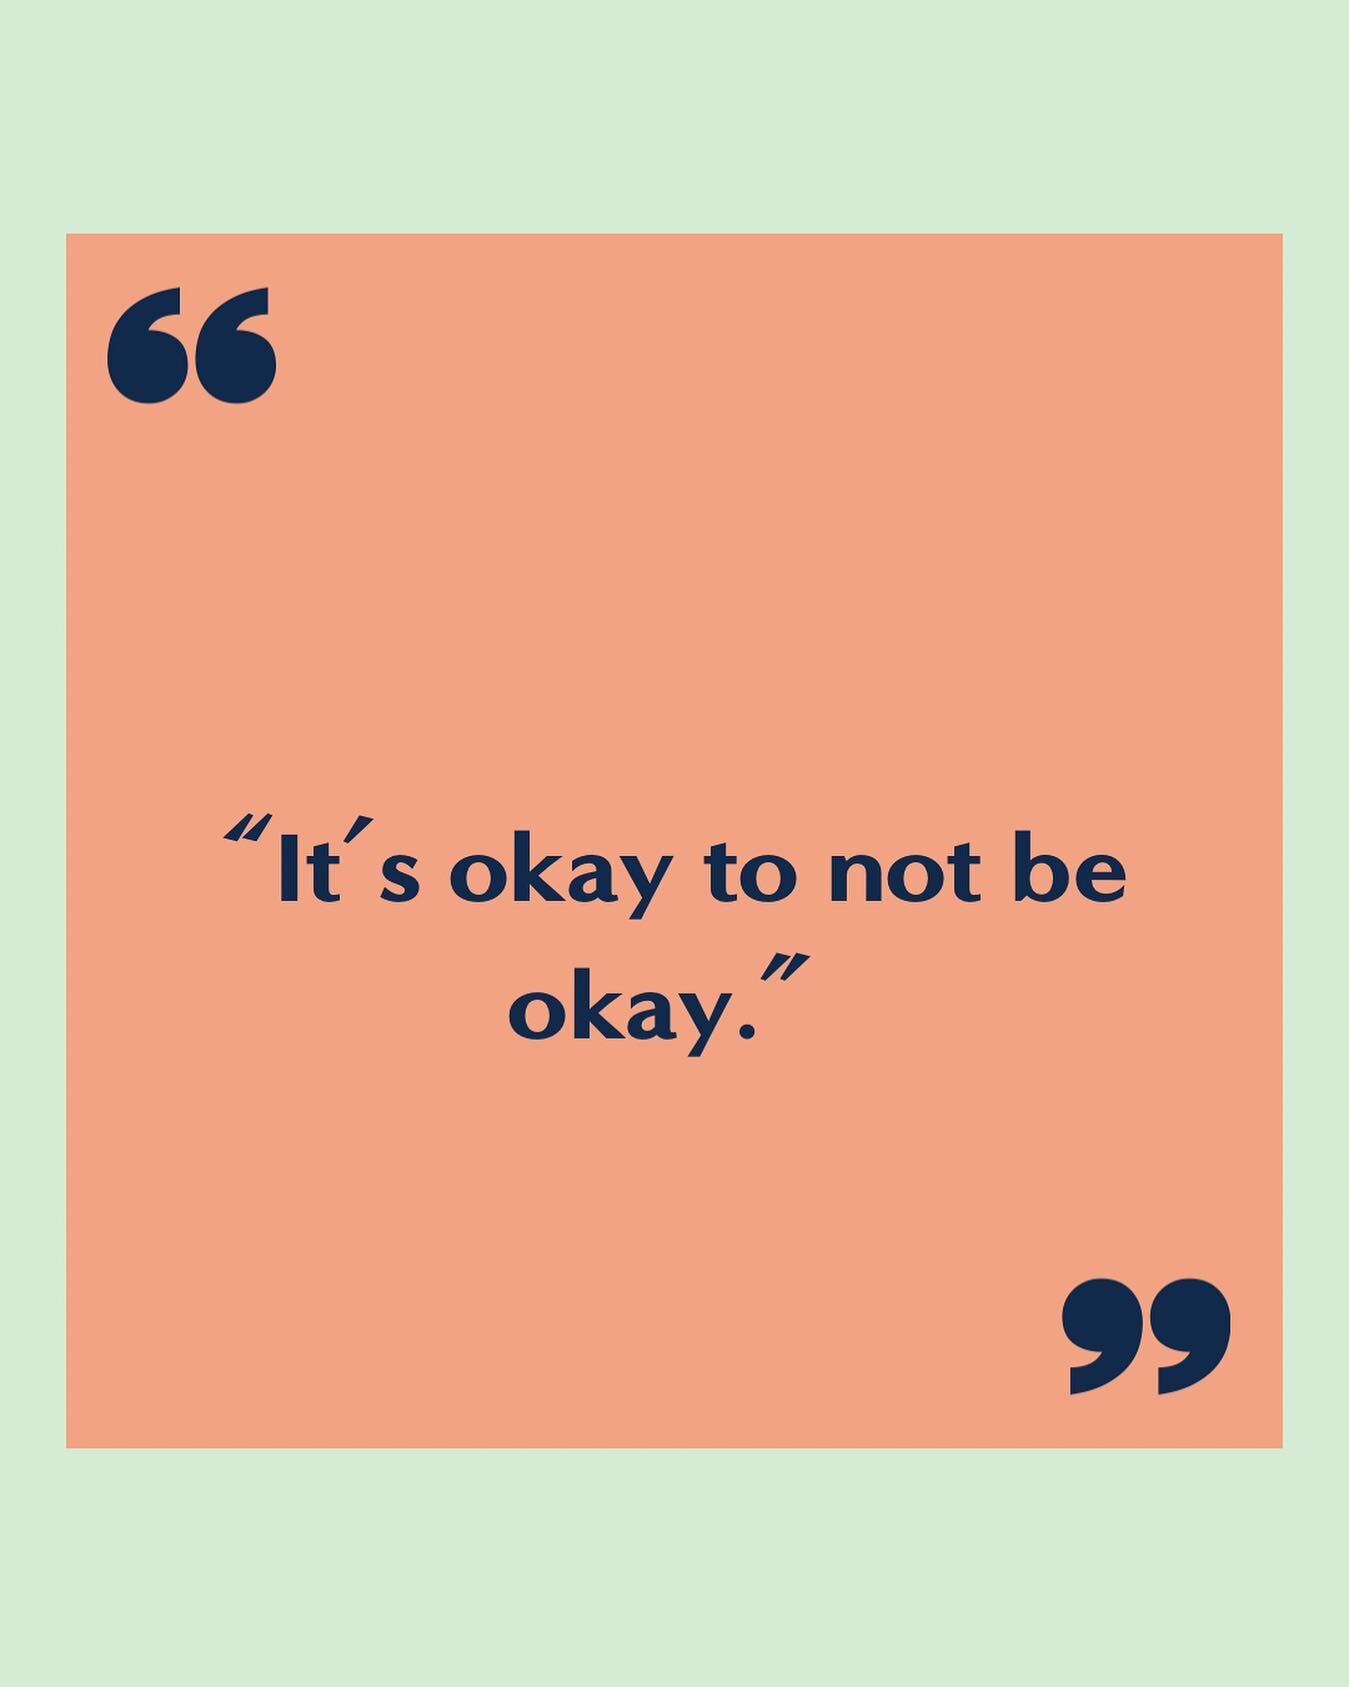 In a culture that tells us &ldquo;don&rsquo;t cry&rdquo;, &ldquo;keep your chin up&rdquo;, &ldquo;you have so much to be happy about&rdquo;, it can be hard to lean into our pain and even to acknowledge that we aren&rsquo;t okay. There is no shame her